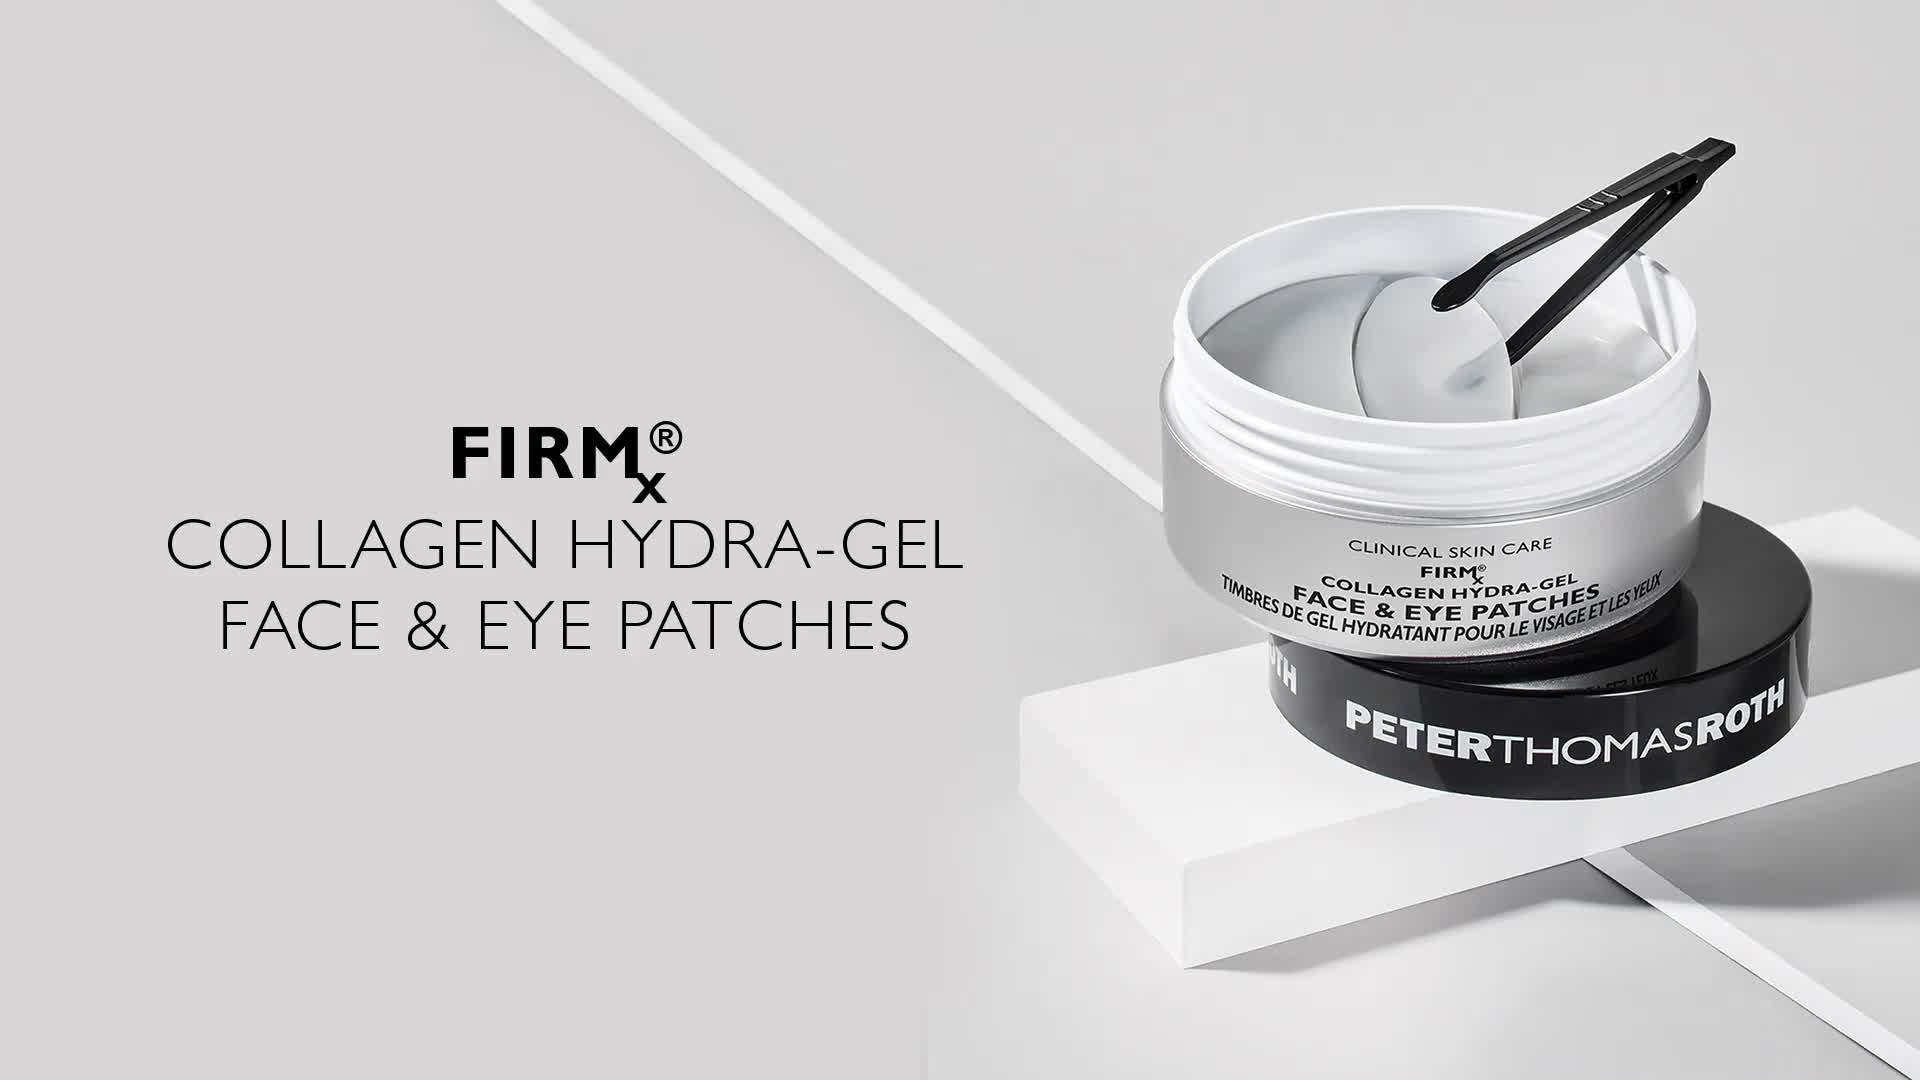 FIRMx Collagen Hydra-Gel Face & Eye Patches - Peter Thomas Roth